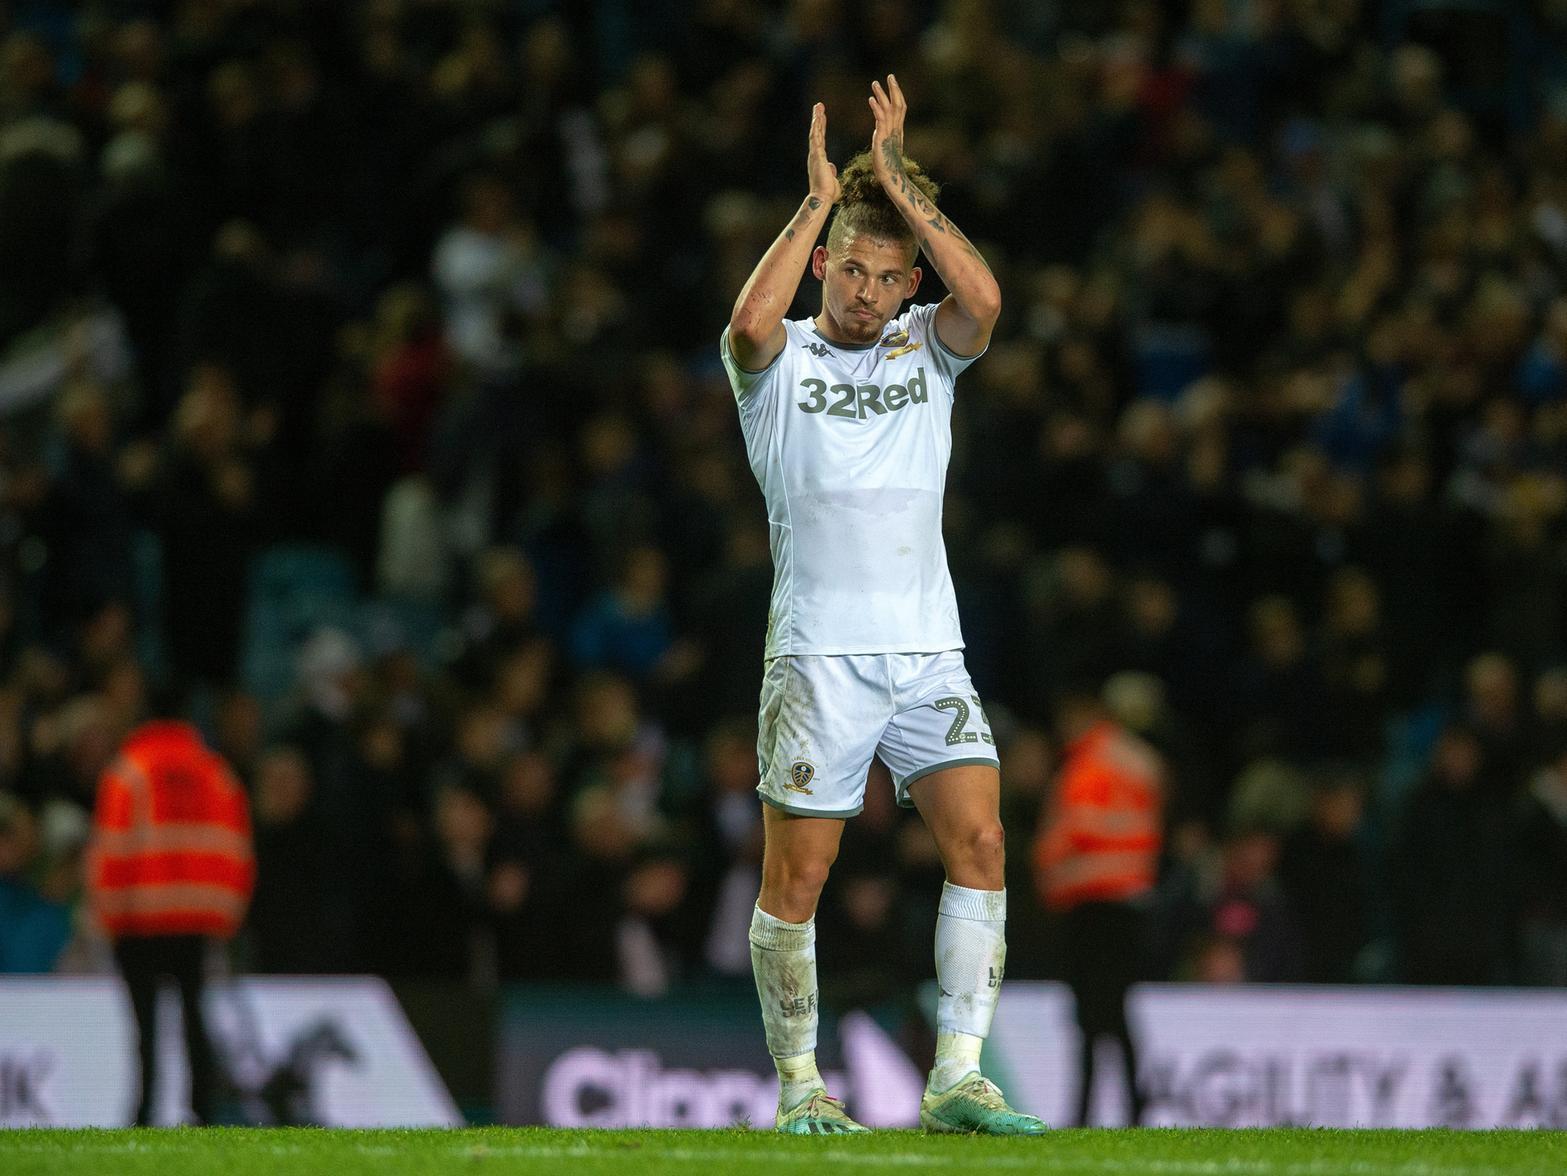 His absence was heavily felt. A return in midweek brought calm back into the Leeds team. Phillips looked refreshed and ready for the promotion battle.